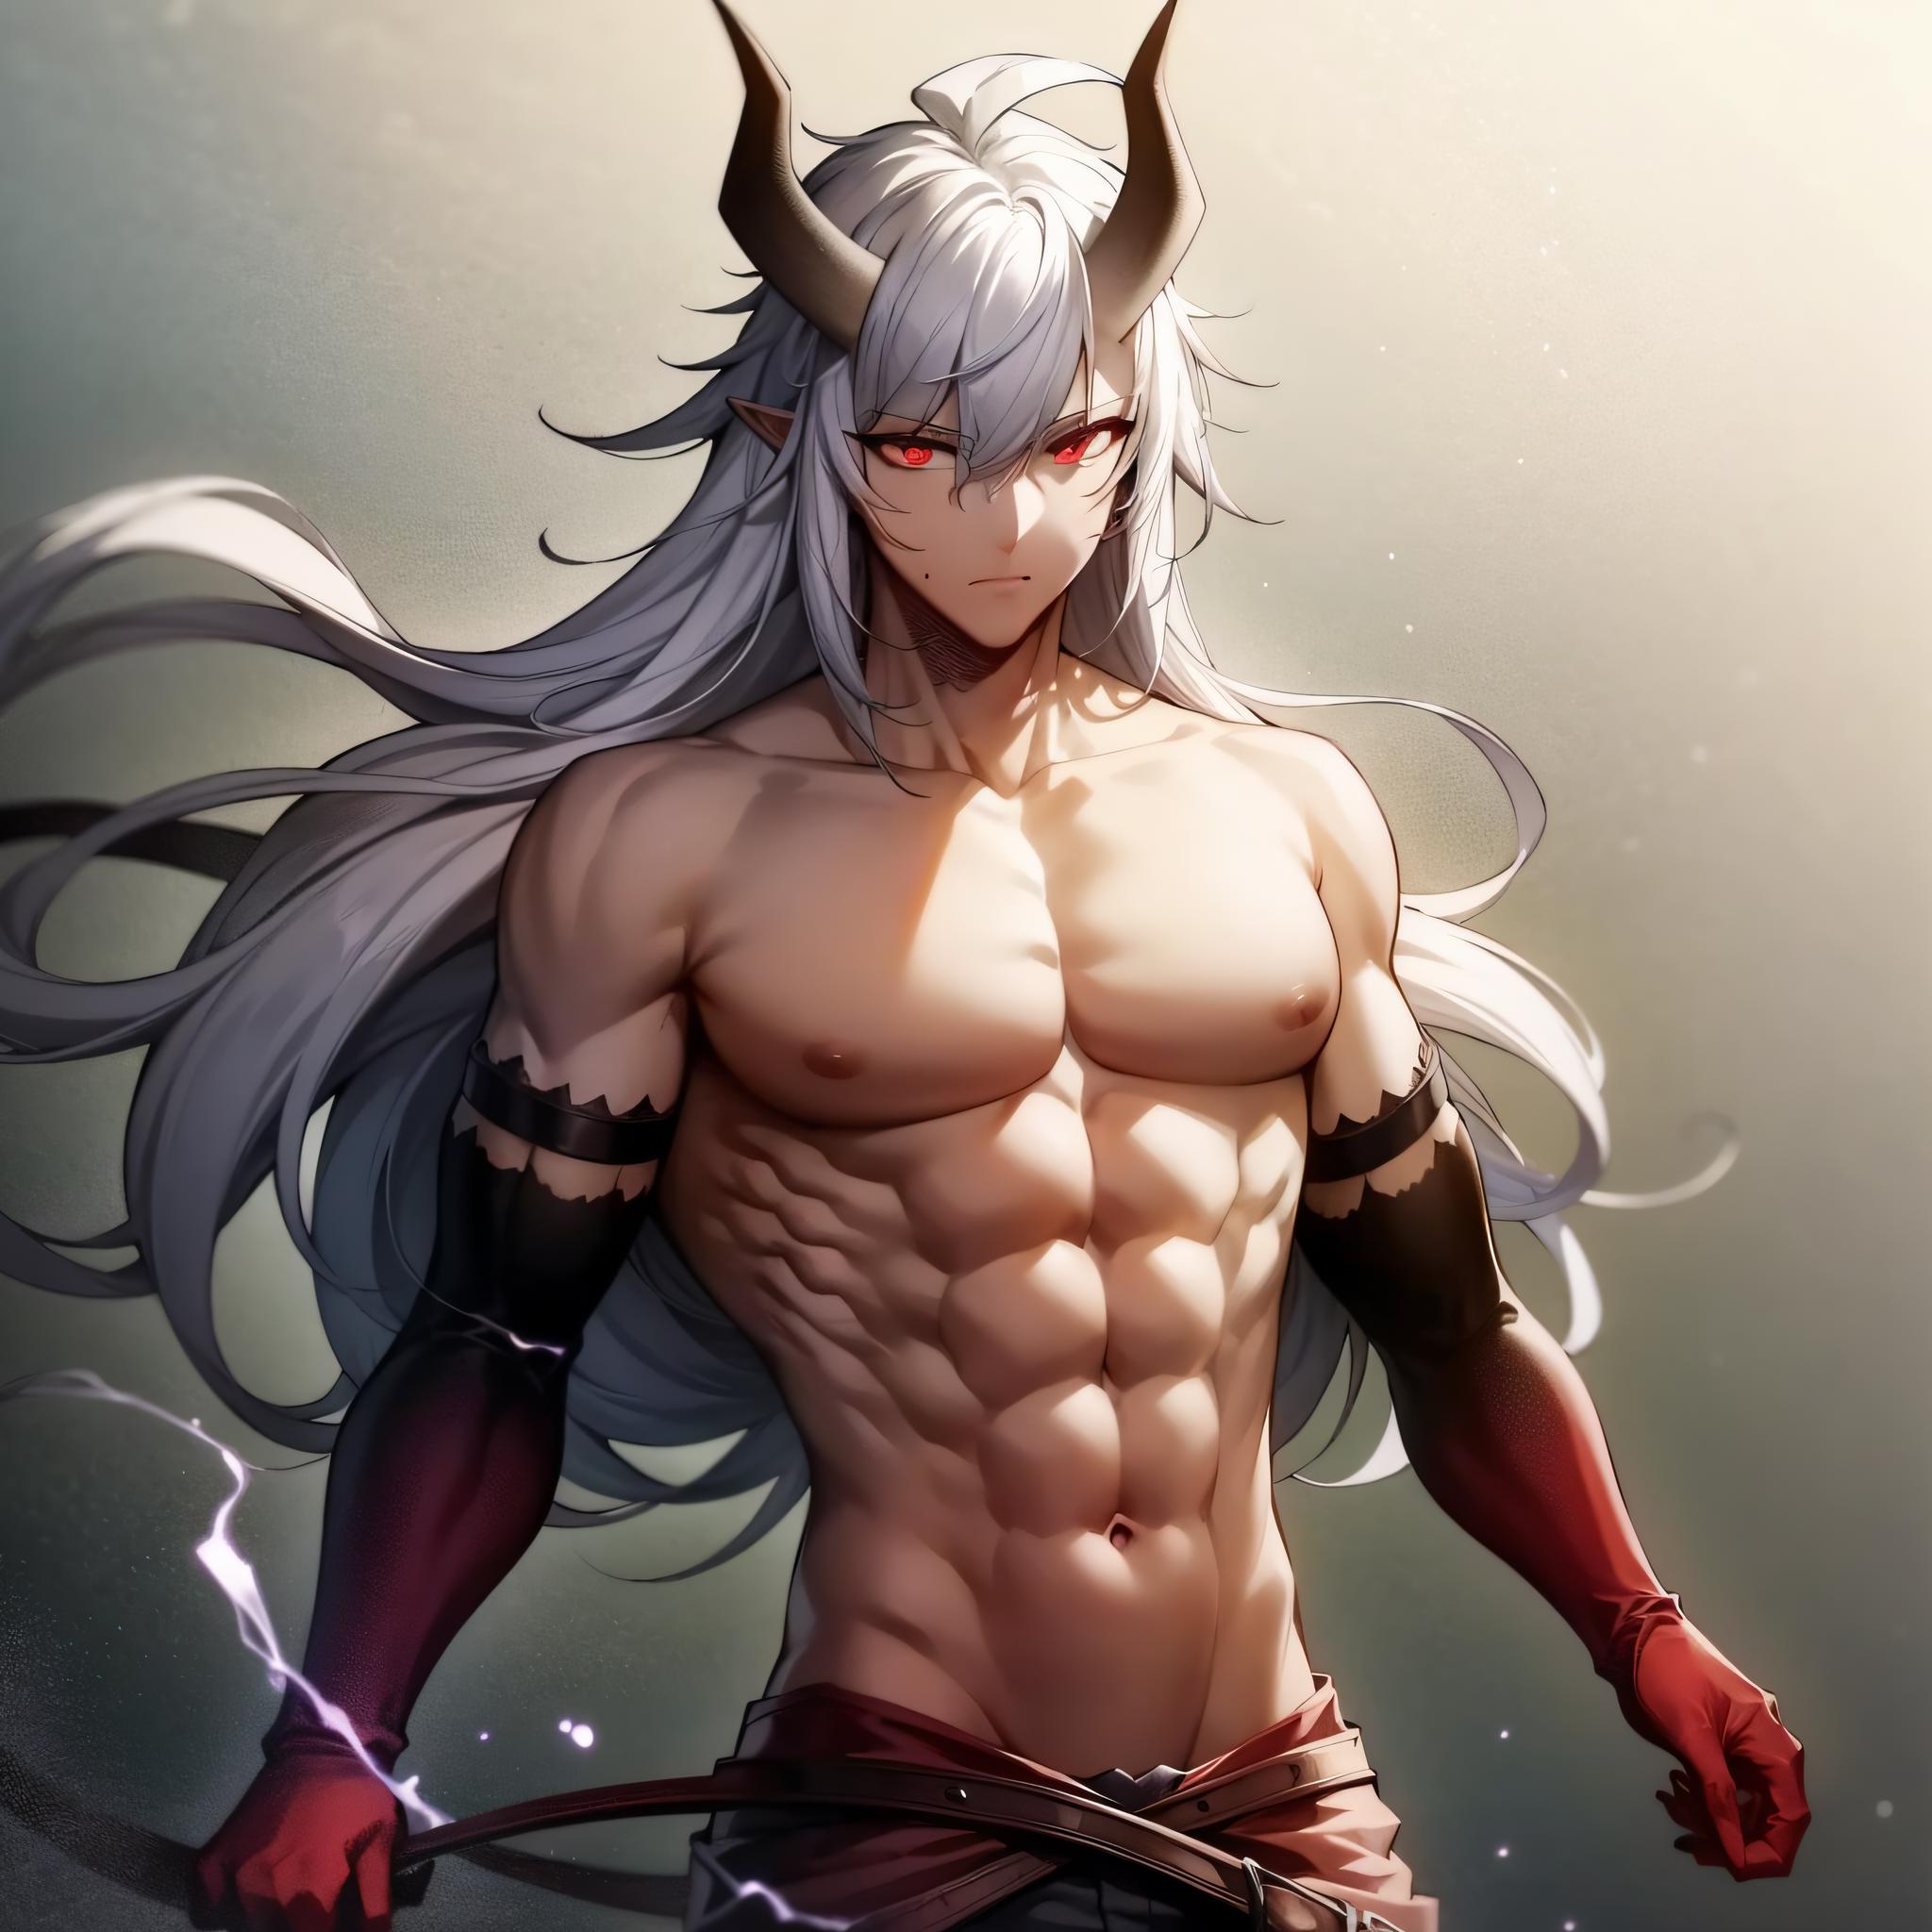 ArtStation - Lucifer-male anime structure